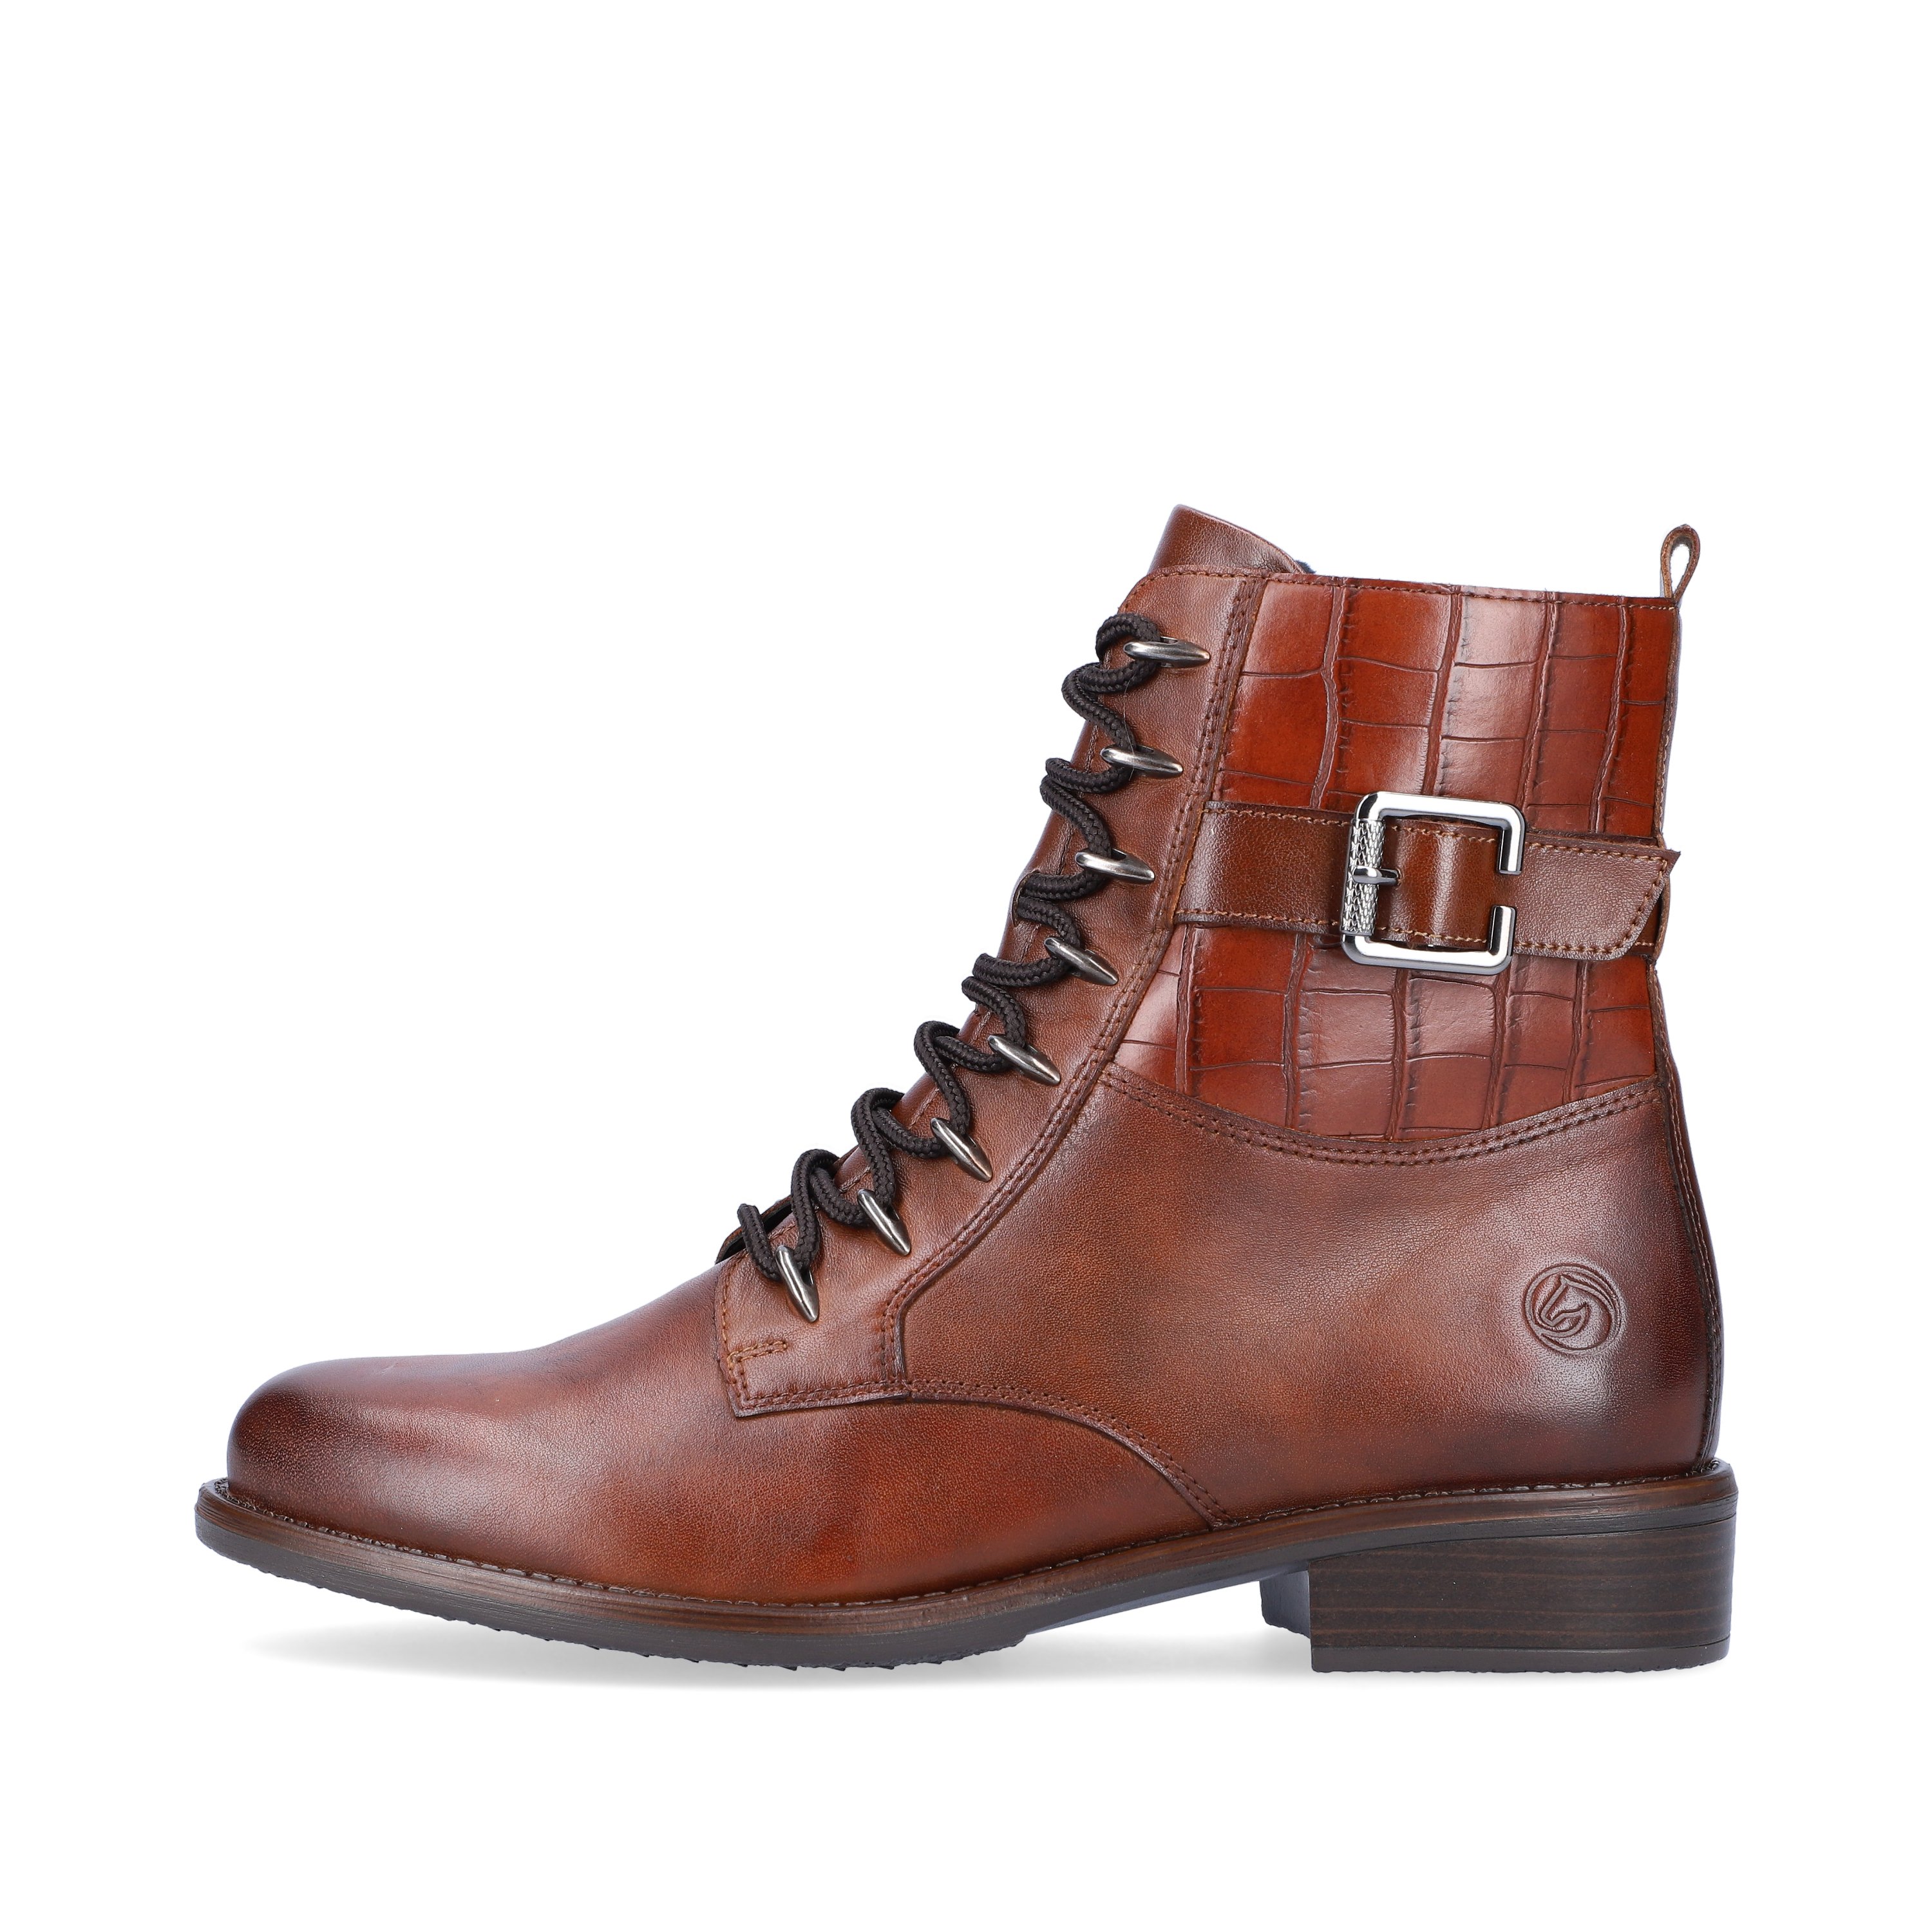 Maroon remonte women´s biker boots D0F72-22 with light sole with block heel. The outside of the shoe